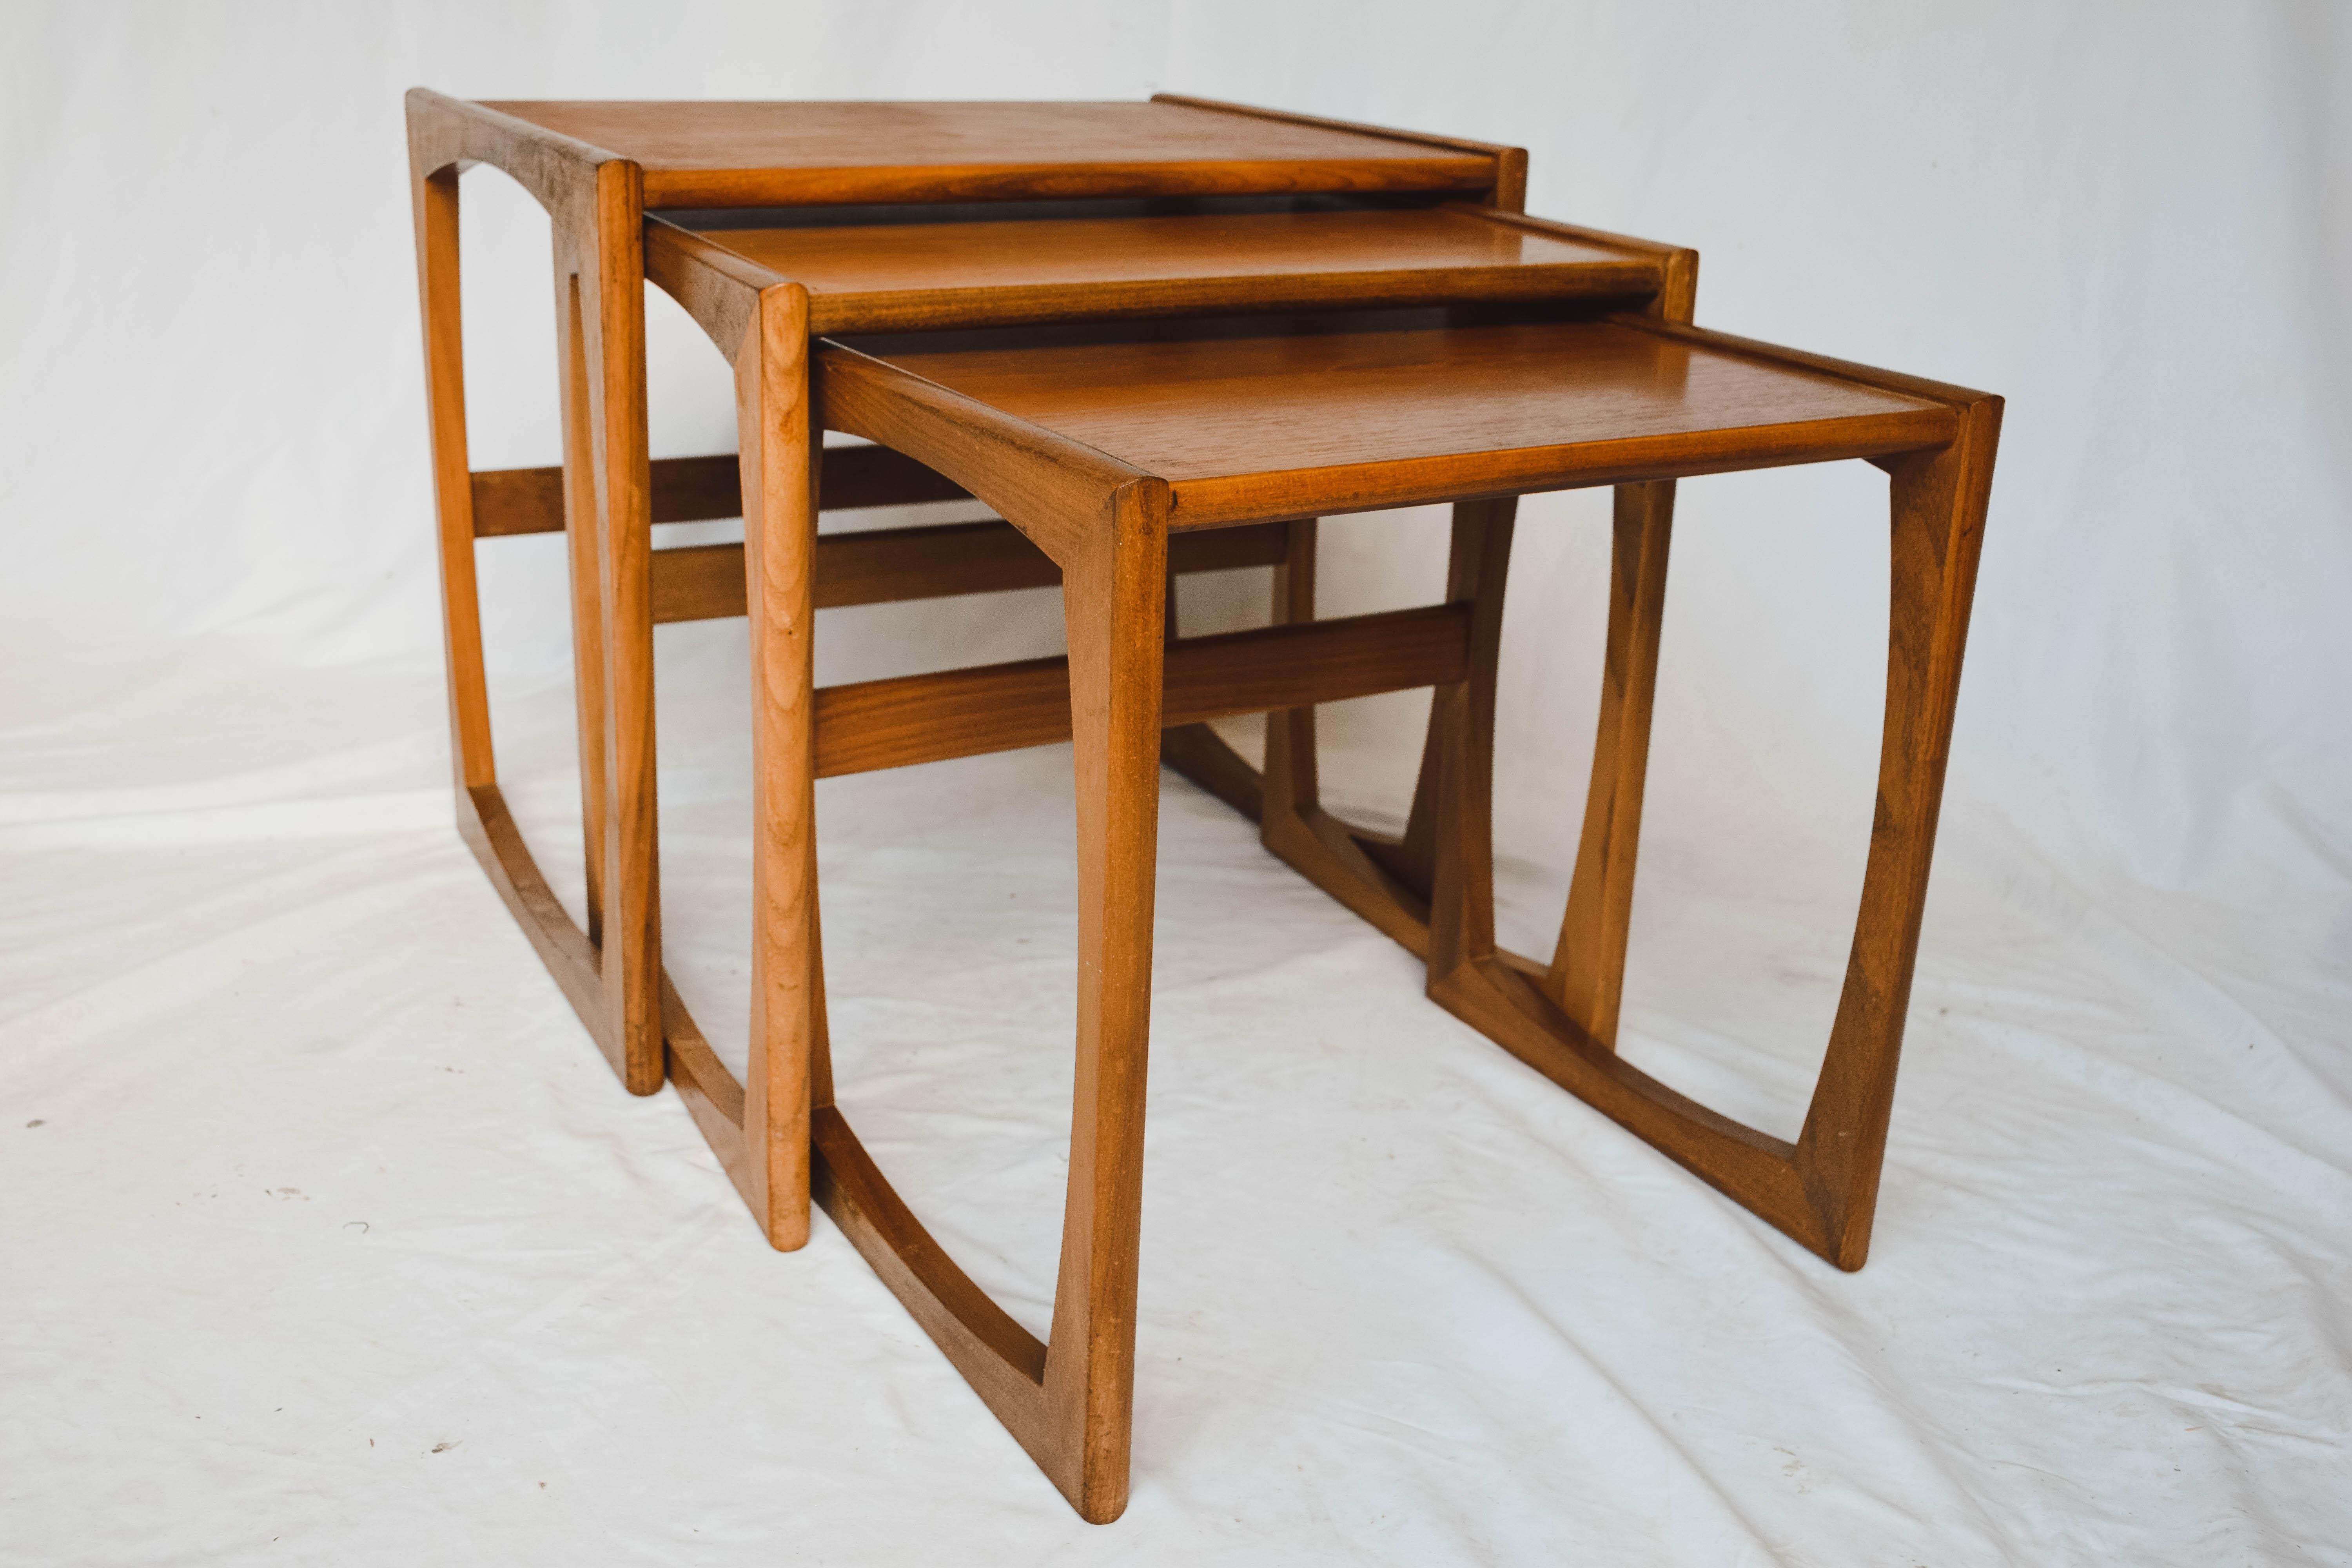 This beautiful set of three nesting tables in teak designed by R. Bennett for G Plan manufactured in England in the 1960s. These G-Plan teak Mid-Century Modern nesting tables with rounded edge 'sleigh' legs are the Quadrille model. This style has